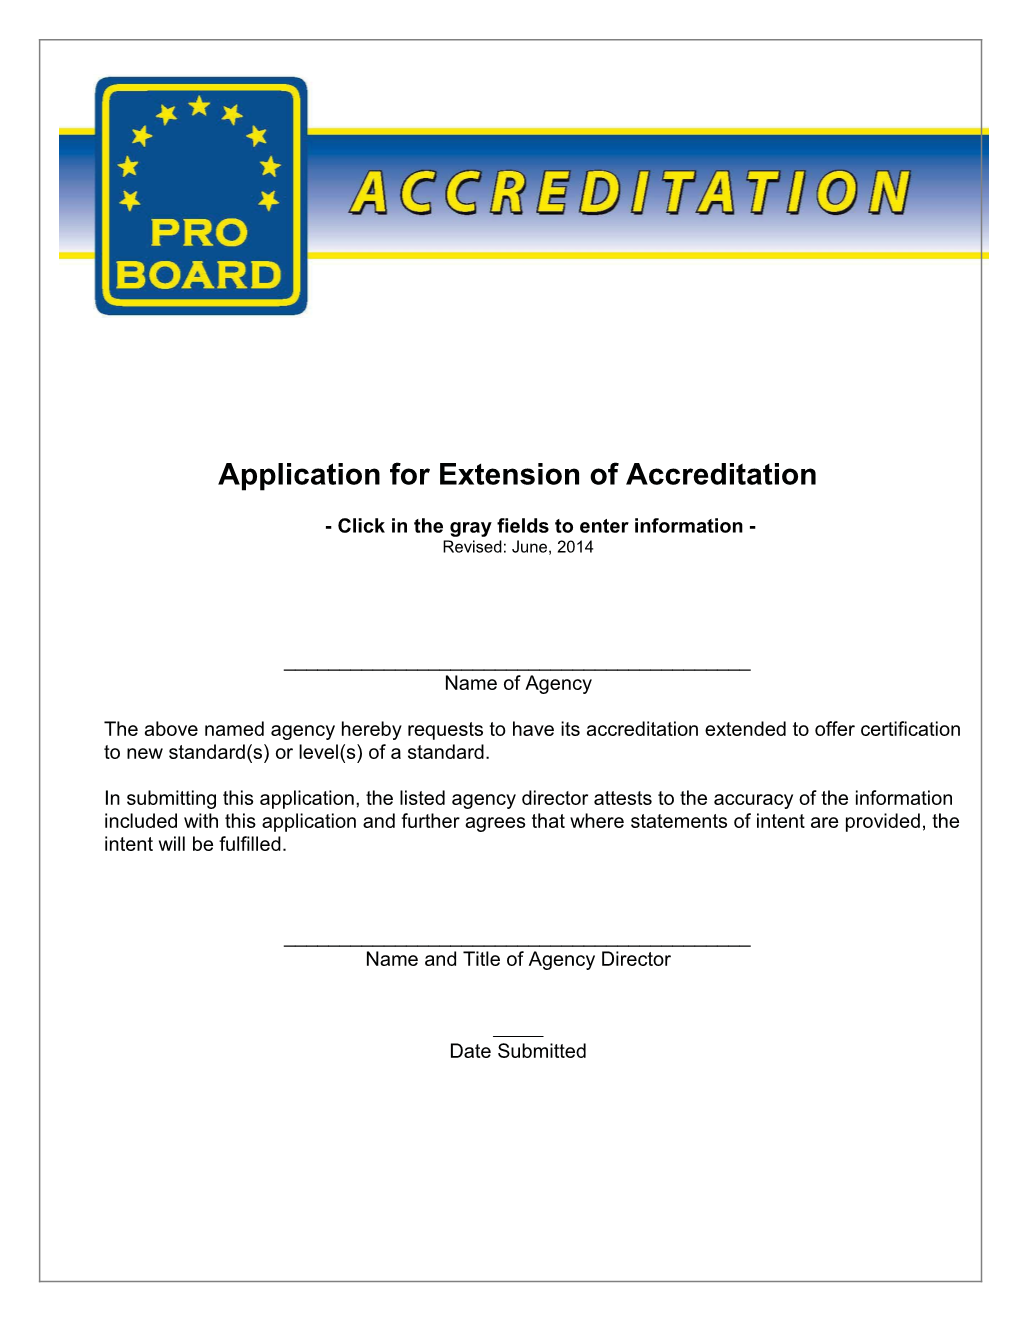 Application for Extension of Accreditation